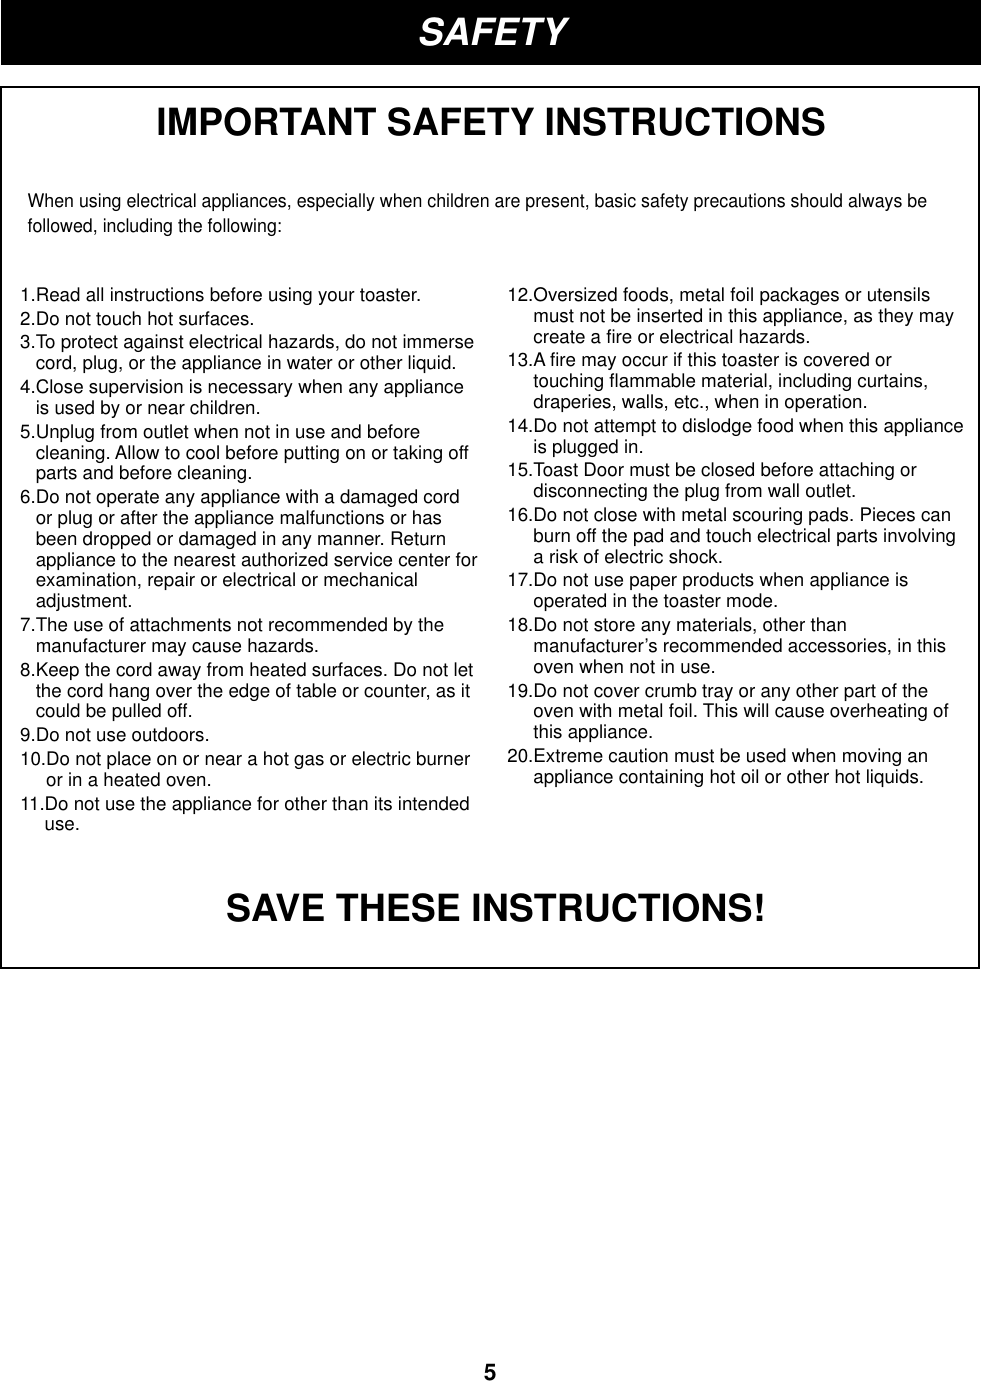 ENGLISH5SAFETYIMPORTANT SAFETY INSTRUCTIONSWhen using electrical appliances, especially when children are present, basic safety precautions should always befollowed, including the following:SAVE THESE INSTRUCTIONS!1.Read all instructions before using your toaster.2.Do not touch hot surfaces.3.To protect against electrical hazards, do not immersecord, plug, or the appliance in water or other liquid.4.Close supervision is necessary when any applianceis used by or near children.5.Unplug from outlet when not in use and beforecleaning. Allow to cool before putting on or taking offparts and before cleaning.6.Do not operate any appliance with a damaged cordor plug or after the appliance malfunctions or hasbeen dropped or damaged in any manner. Returnappliance to the nearest authorized service center forexamination, repair or electrical or mechanicaladjustment.7.The use of attachments not recommended by themanufacturer may cause hazards.8.Keep the cord away from heated surfaces. Do not letthe cord hang over the edge of table or counter, as itcould be pulled off.9.Do not use outdoors.10.Do not place on or near a hot gas or electric burneror in a heated oven. 11.Do not use the appliance for other than its intendeduse.12.Oversized foods, metal foil packages or utensilsmust not be inserted in this appliance, as they maycreate a fire or electrical hazards.13.A fire may occur if this toaster is covered ortouching flammable material, including curtains,draperies, walls, etc., when in operation.14.Do not attempt to dislodge food when this applianceis plugged in.15.Toast Door must be closed before attaching ordisconnecting the plug from wall outlet.16.Do not close with metal scouring pads. Pieces canburn off the pad and touch electrical parts involvinga risk of electric shock.17.Do not use paper products when appliance isoperated in the toaster mode.18.Do not store any materials, other thanmanufacturer’s recommended accessories, in thisoven when not in use.19.Do not cover crumb tray or any other part of theoven with metal foil. This will cause overheating ofthis appliance.20.Extreme caution must be used when moving anappliance containing hot oil or other hot liquids.